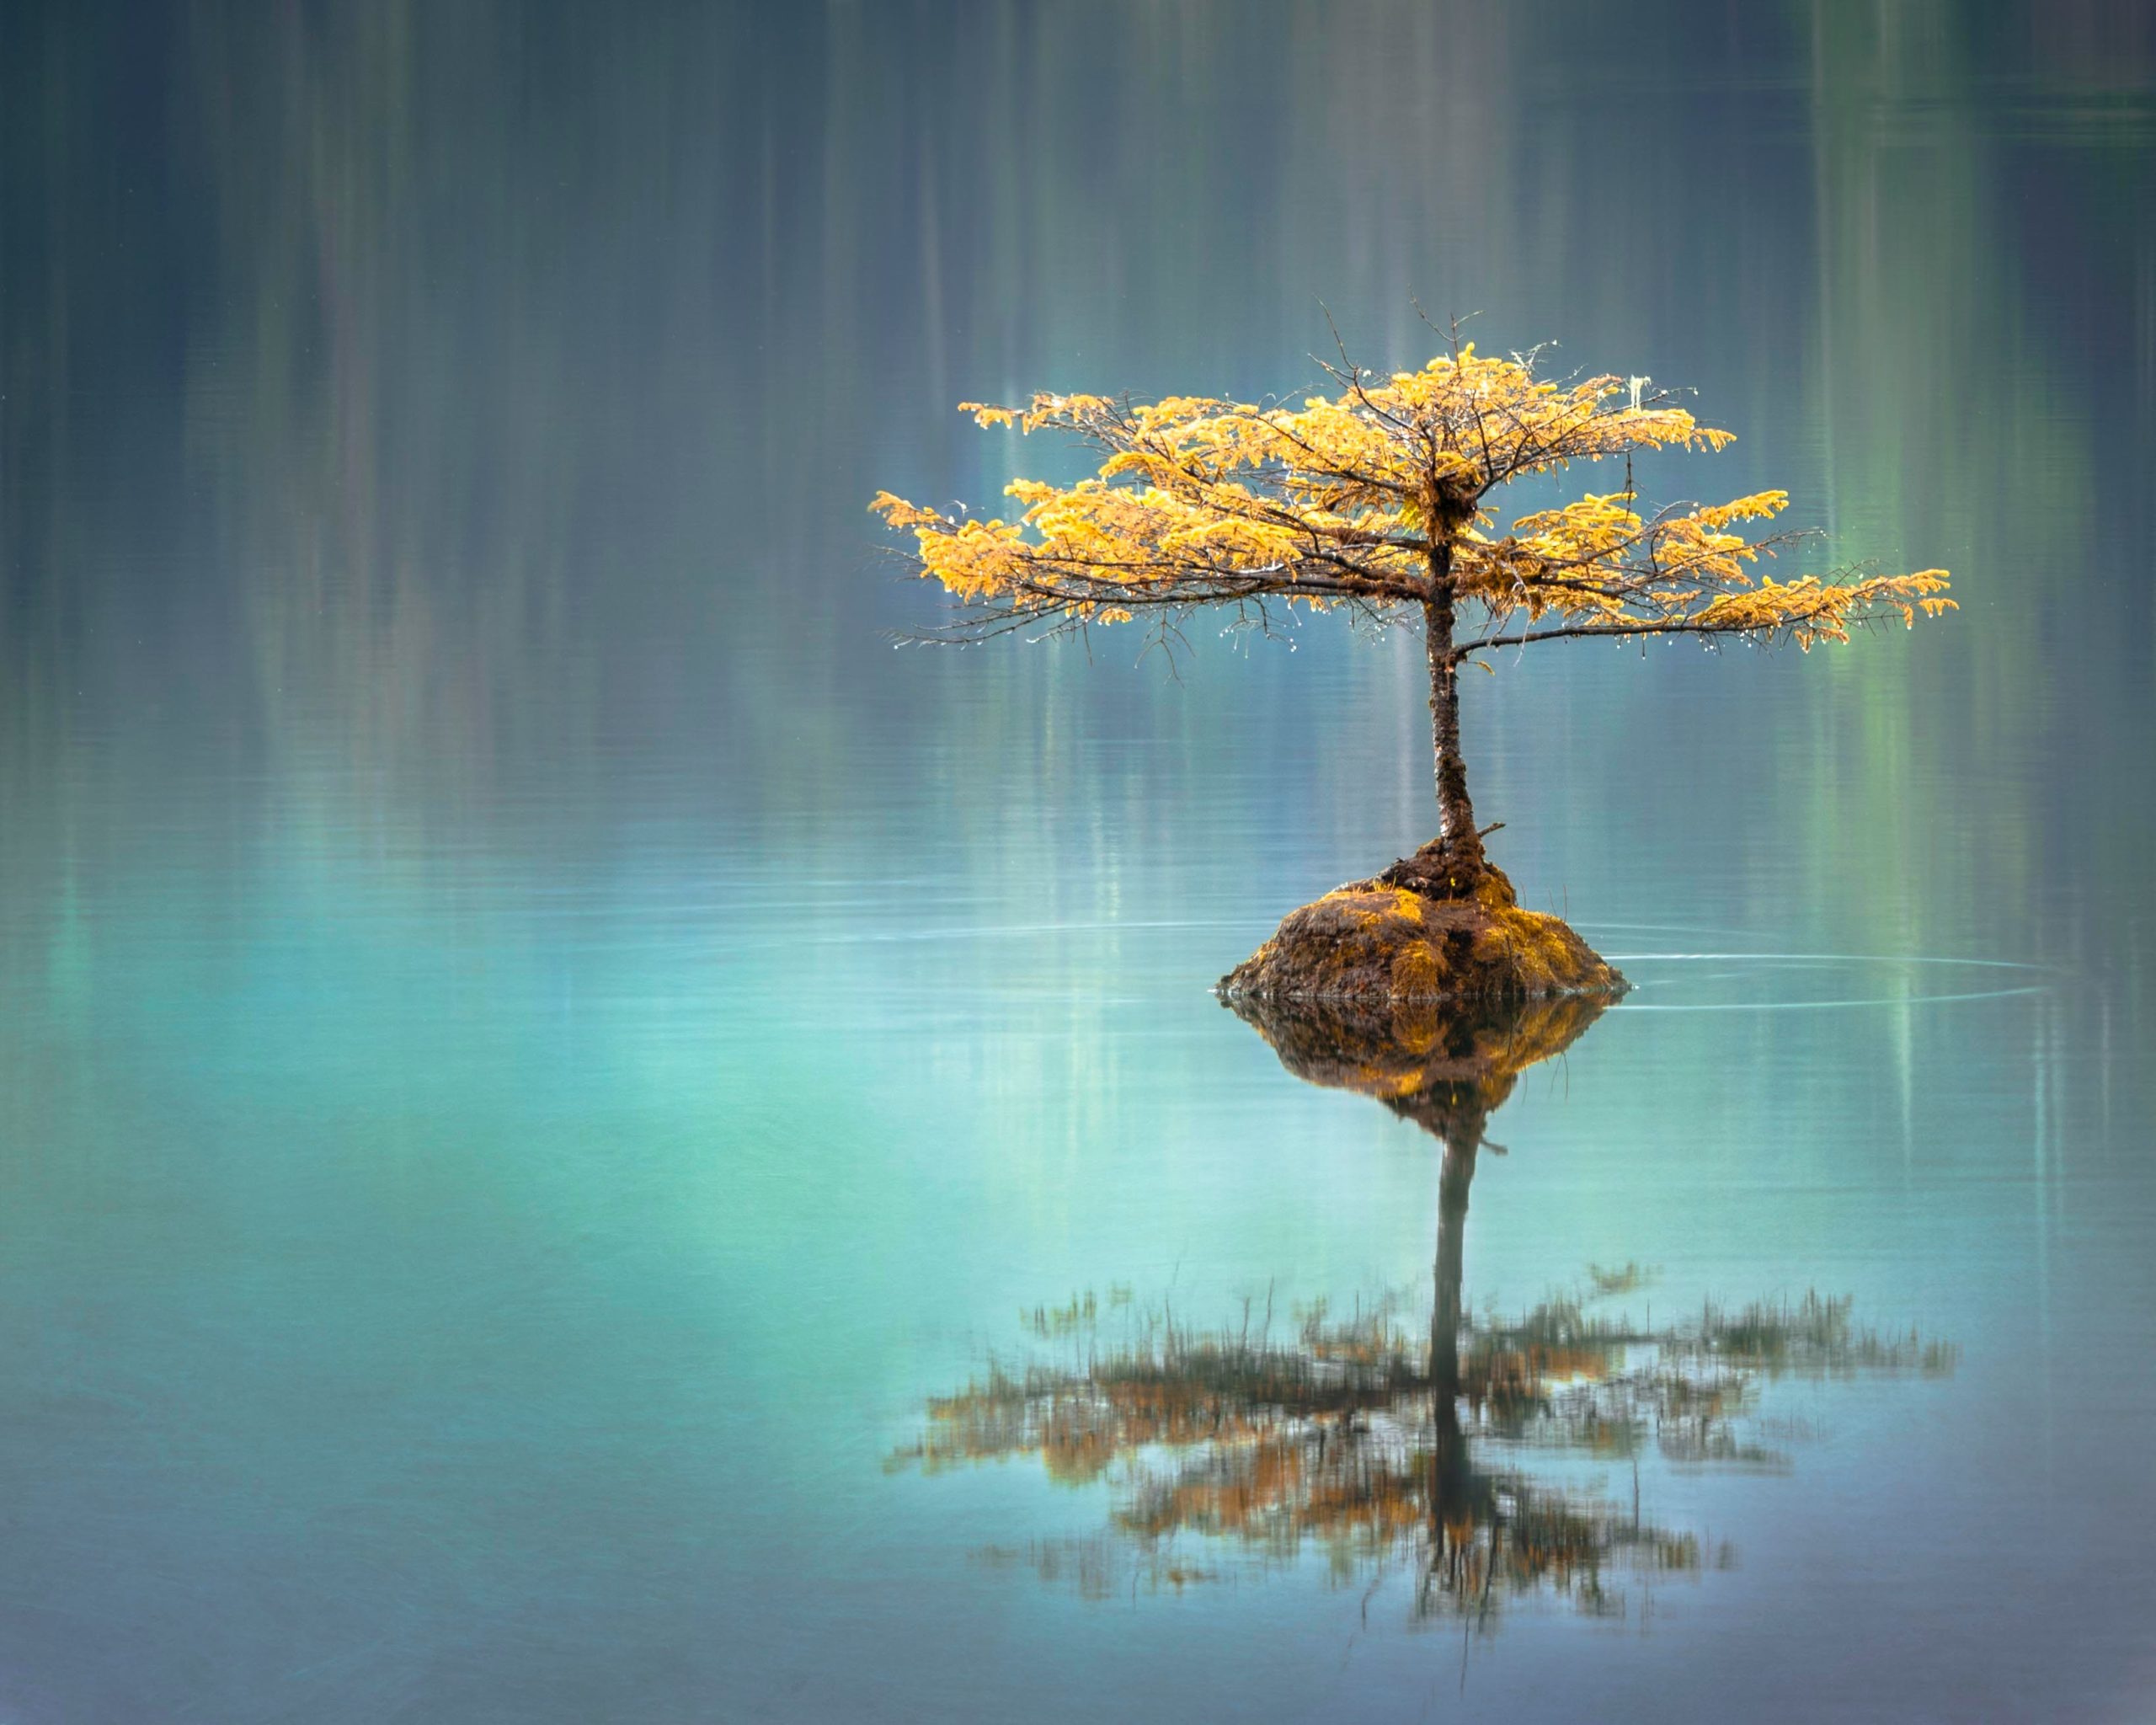 Small tree reflecting in the water